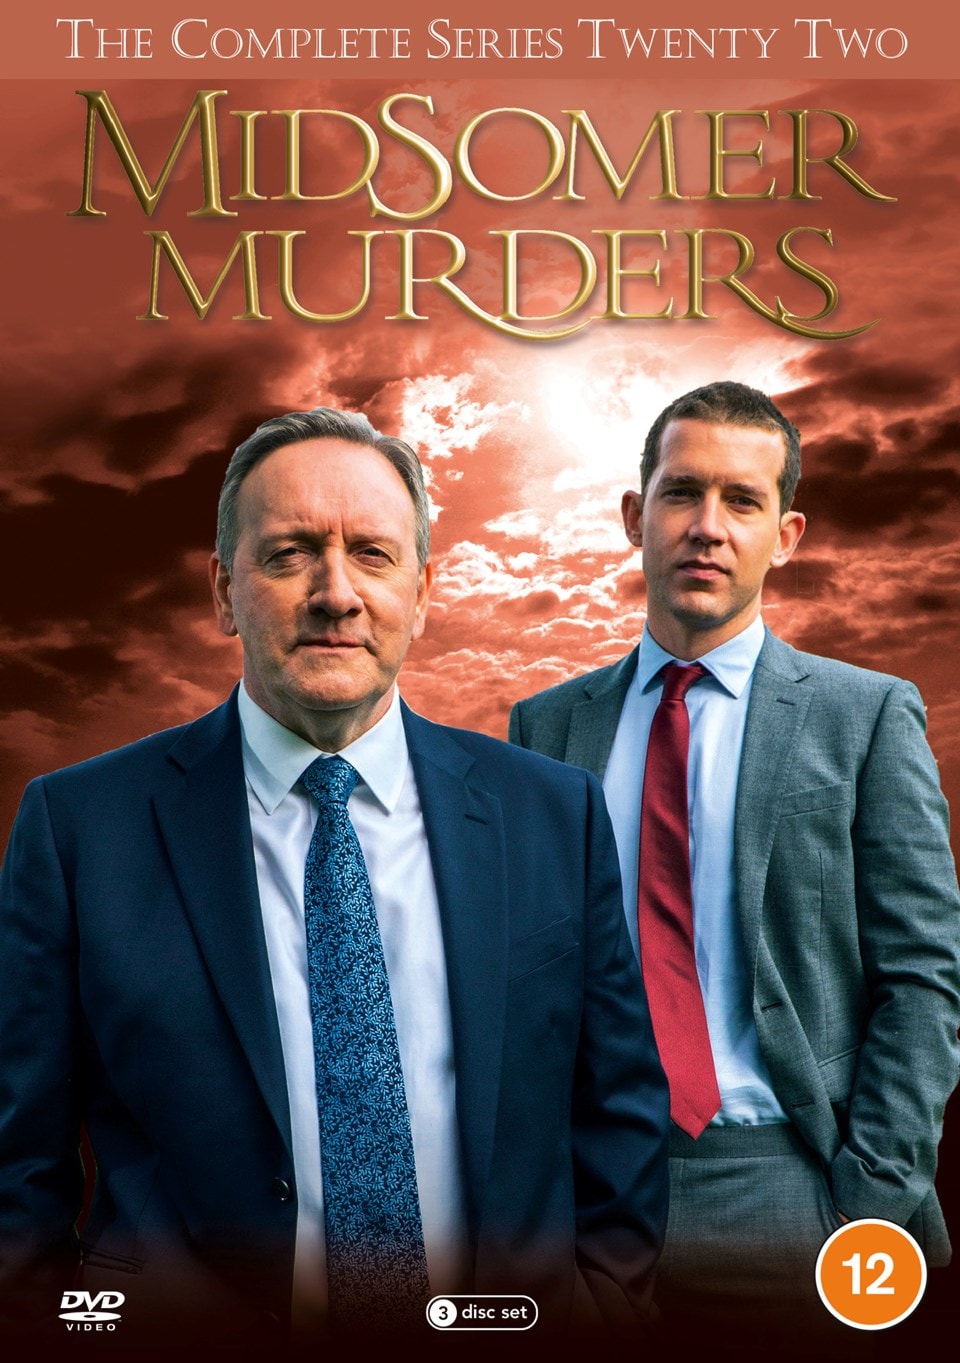 Midsomer Murders The Complete Series 22 Dvd Box Set Free Shipping Over £20 Hmv Store